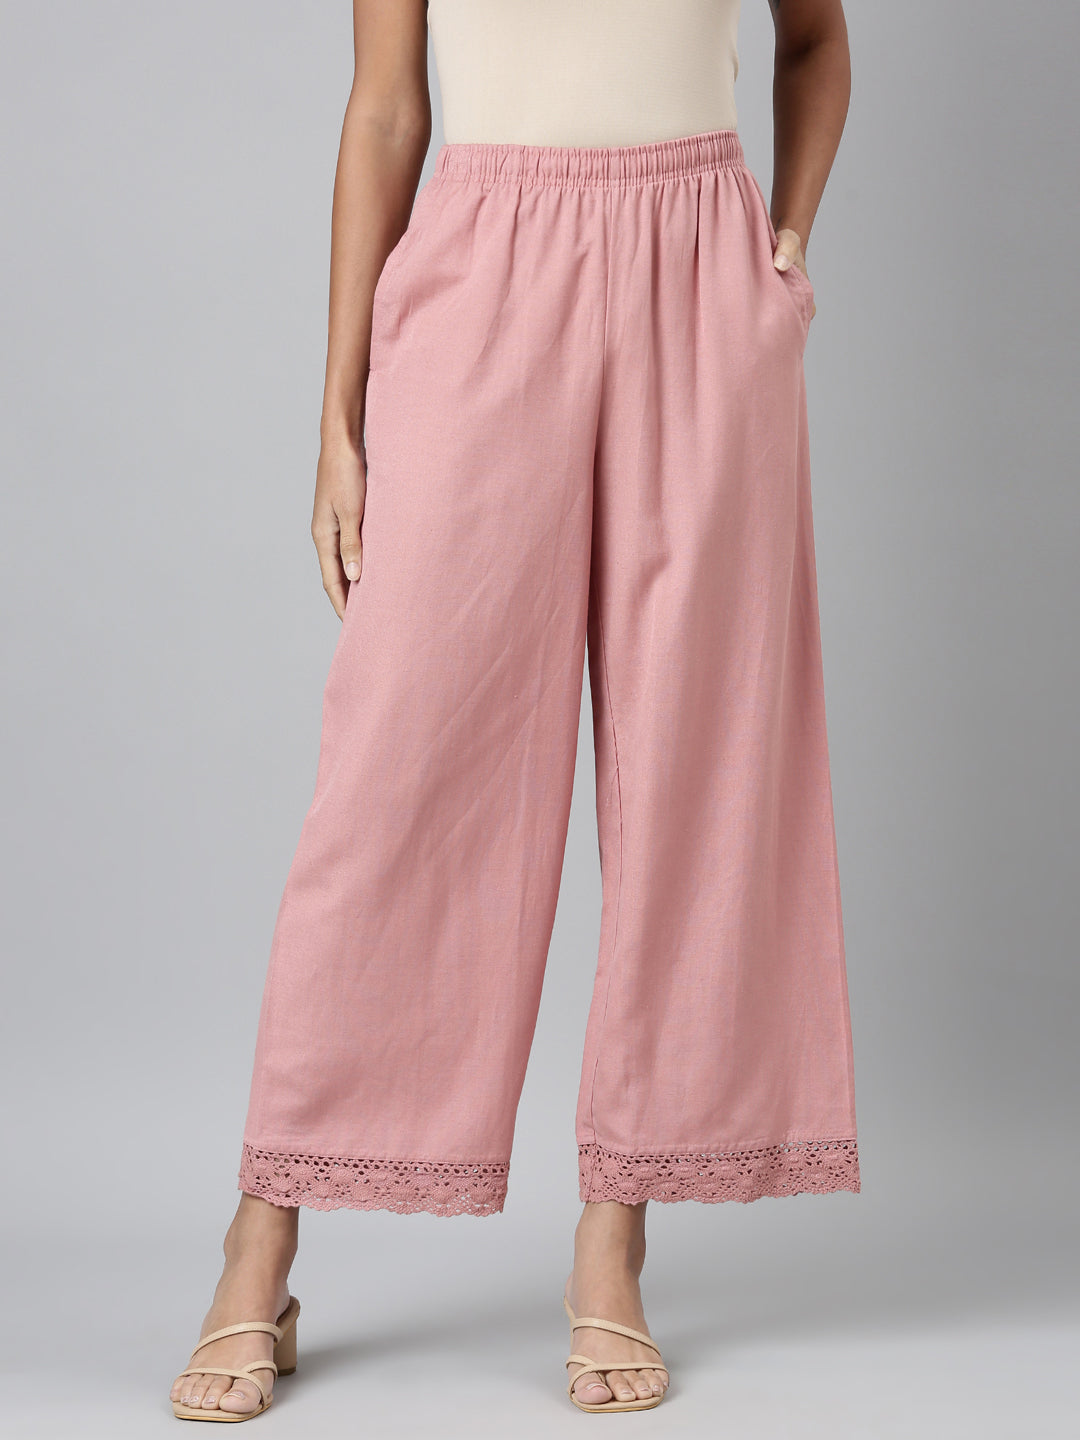 Buy W Light Pink Solid Parallel Palazzos for Women¿s Online @ Tata CLiQ